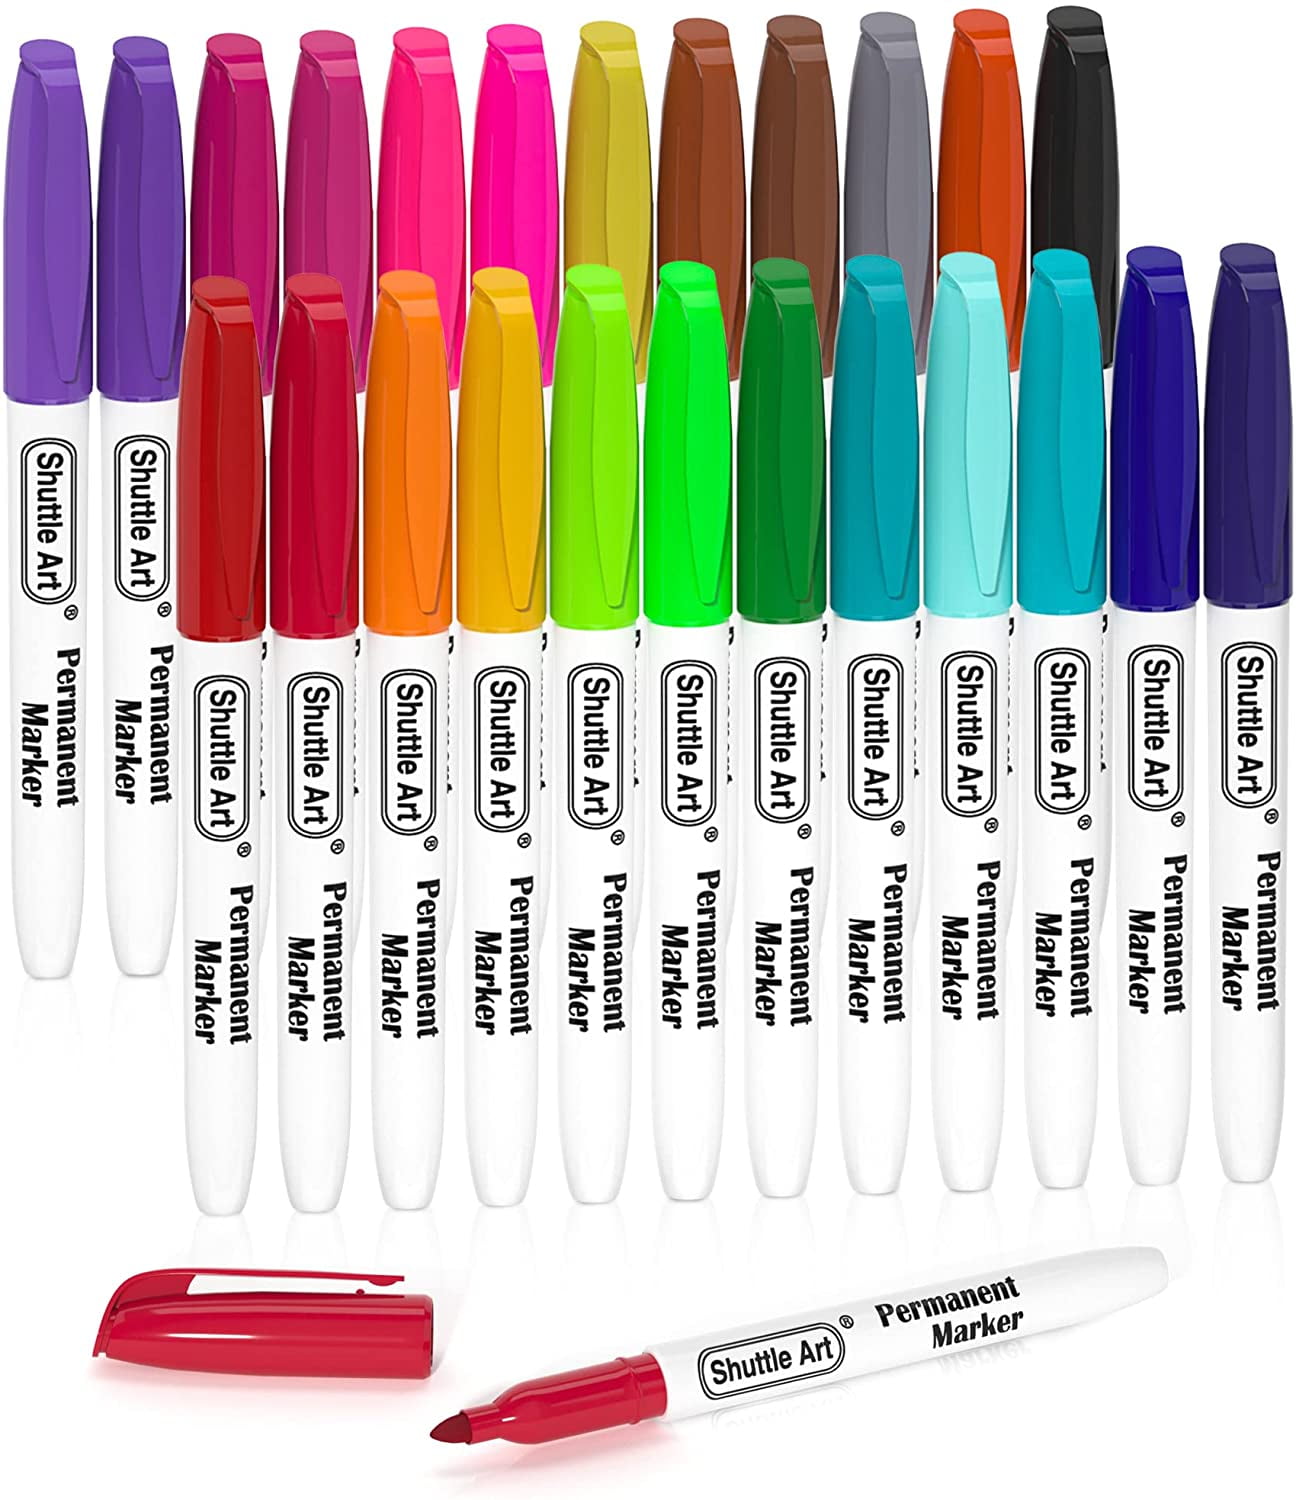 Permanent Markers, Shuttle Art 24 Colors Fine Point Assorted Colors  Permanent Marker Set, Works on Plastic,Wood,Stone,Metal and Glass for  Doodling, Coloring, Marking for School Supplies 